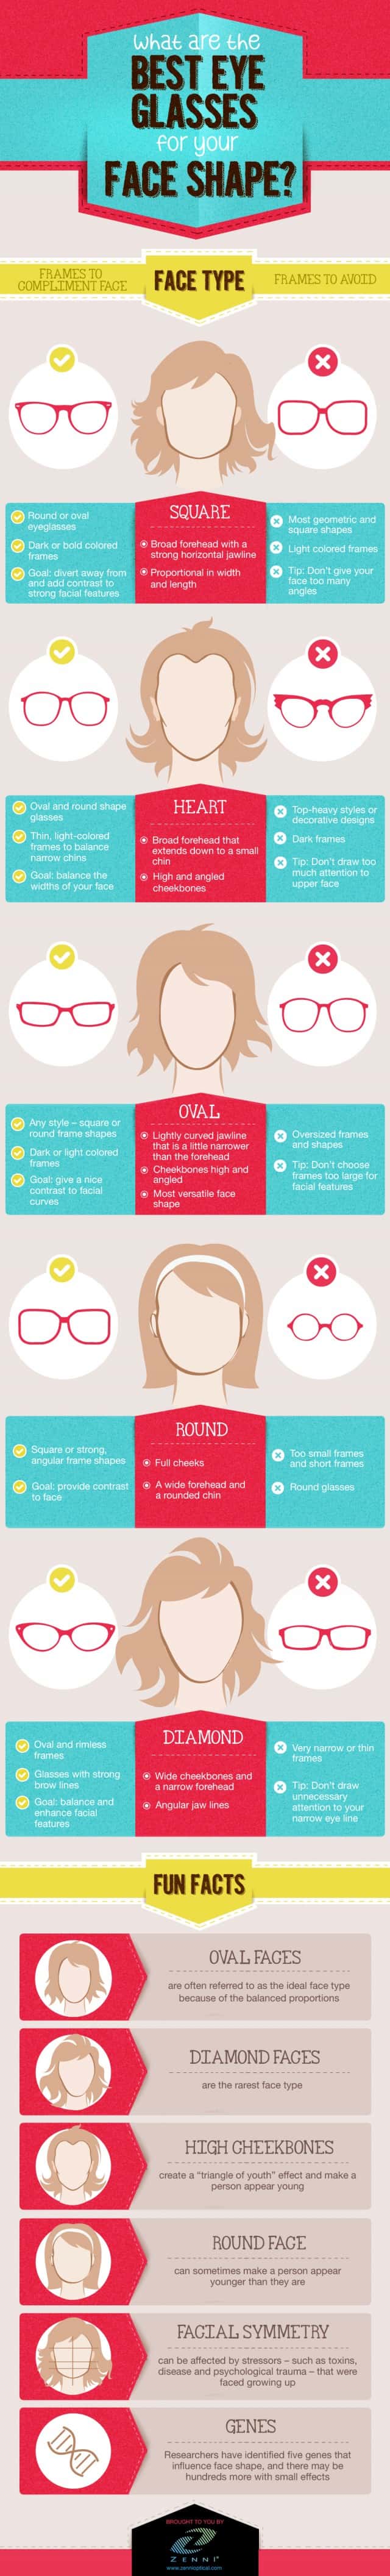 The Best Eye Glasses For Your Face Shape